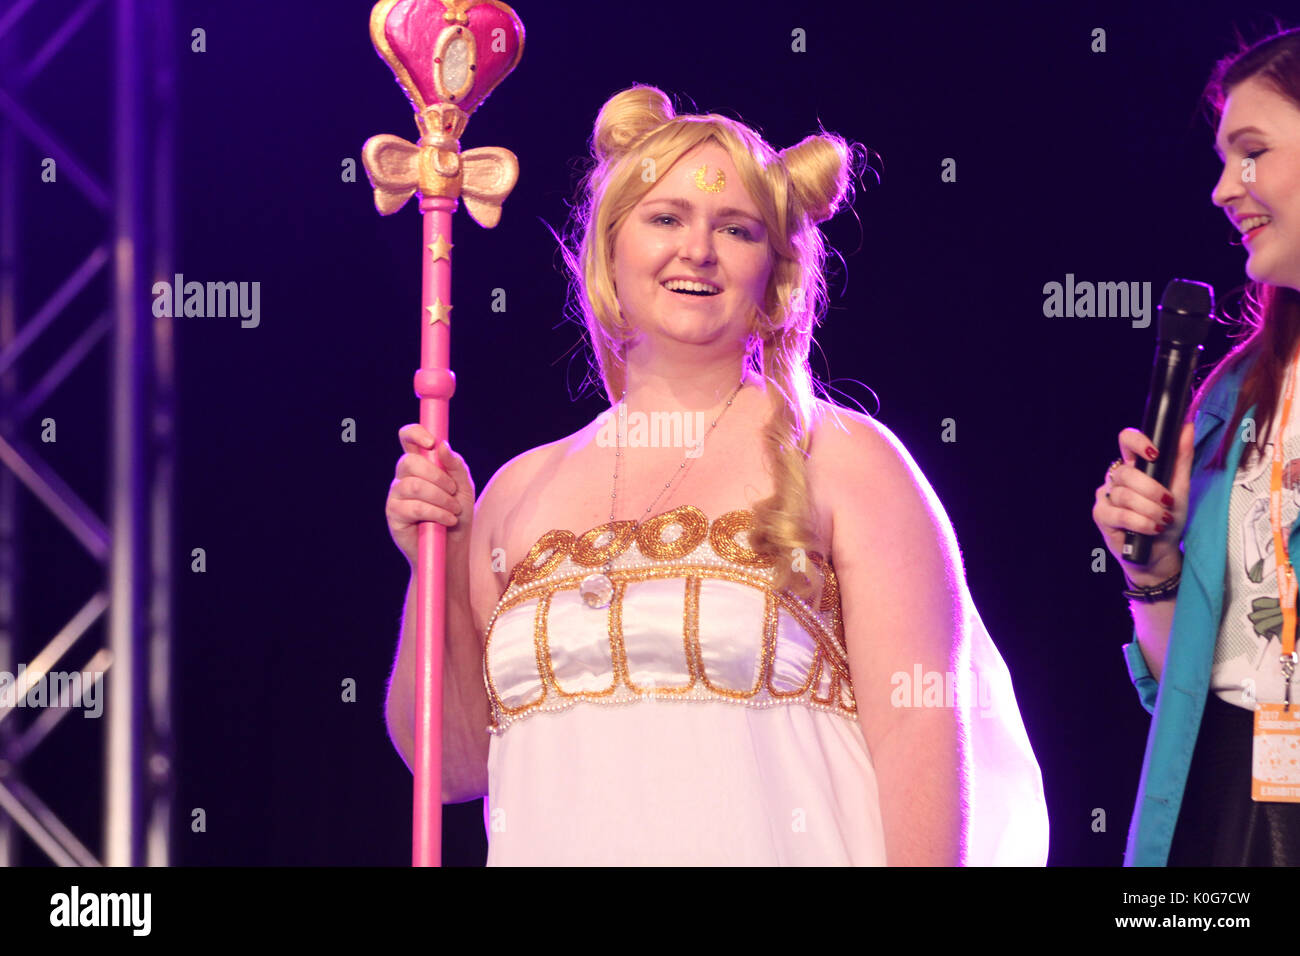 Sydney, Australia. 19 August 2017. Pictured: Cosplay competition & catwalk: Pretty Guardian Sailor Moon, Lucie as Princess Serenity. SMASH! Sydney Man Stock Photo